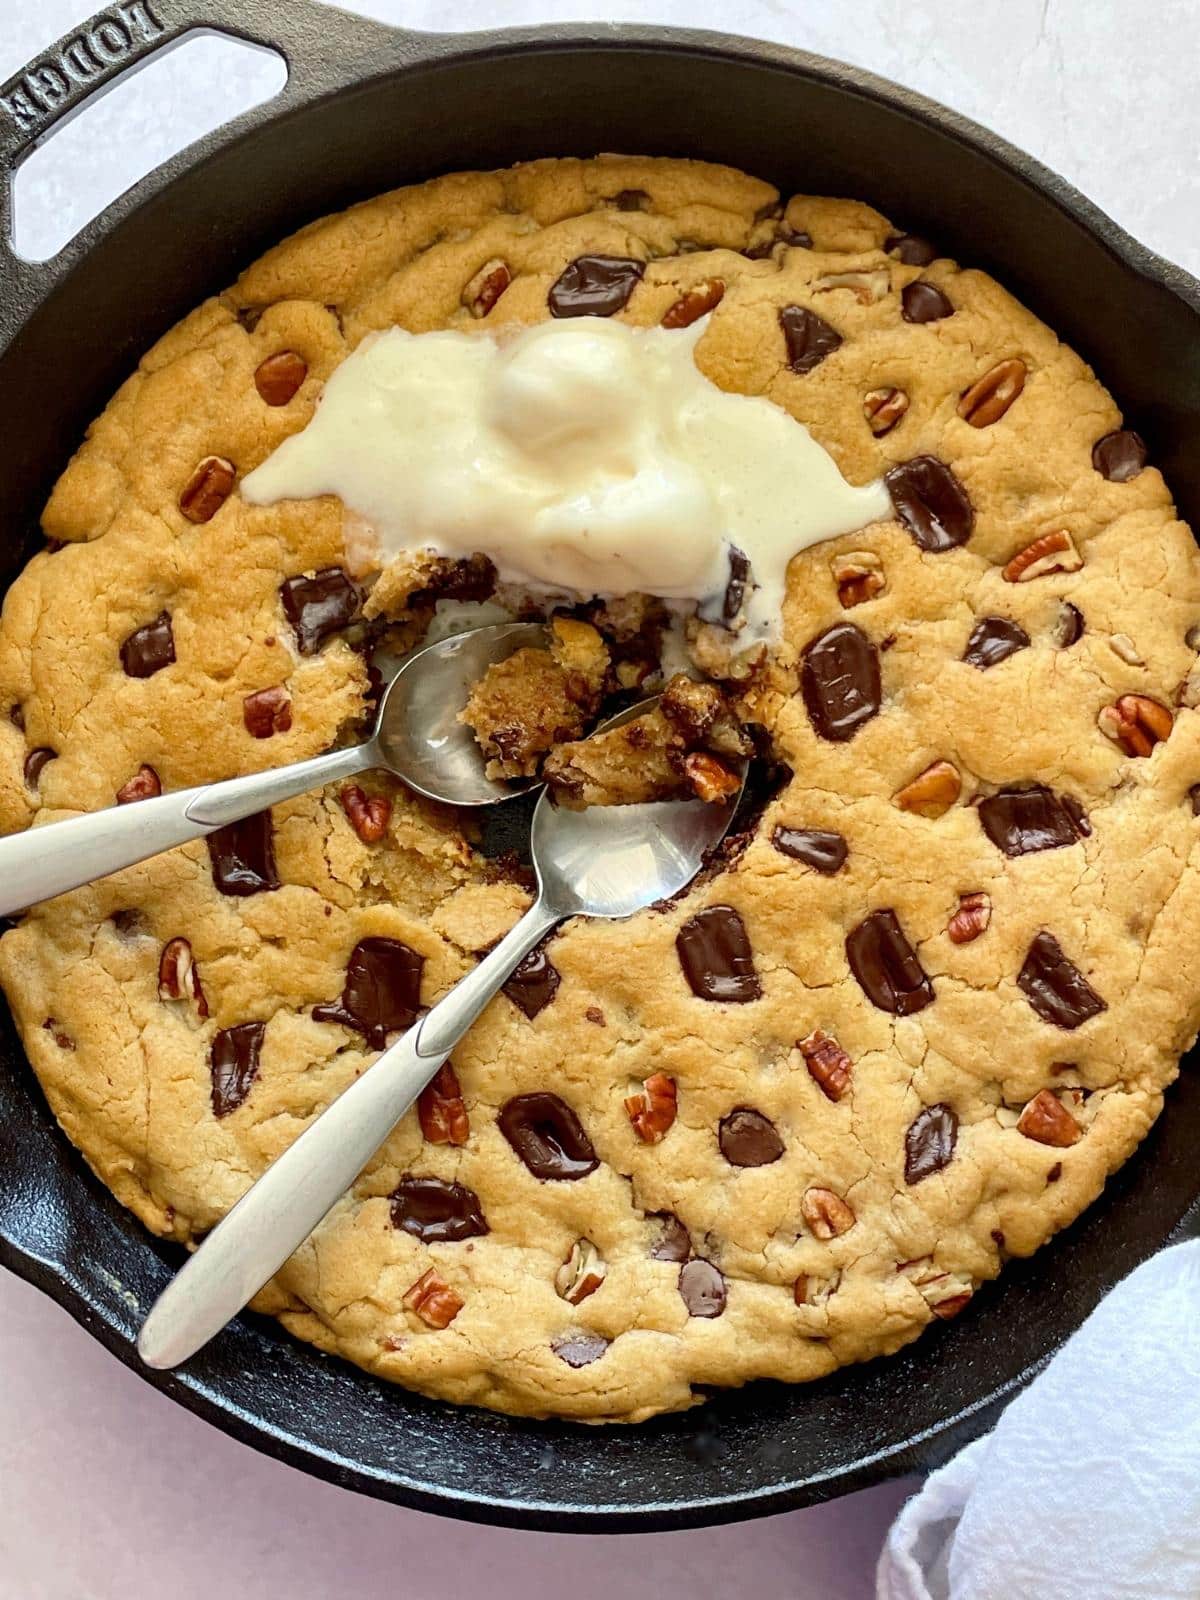 Eating the skillet cookie with ice cream.